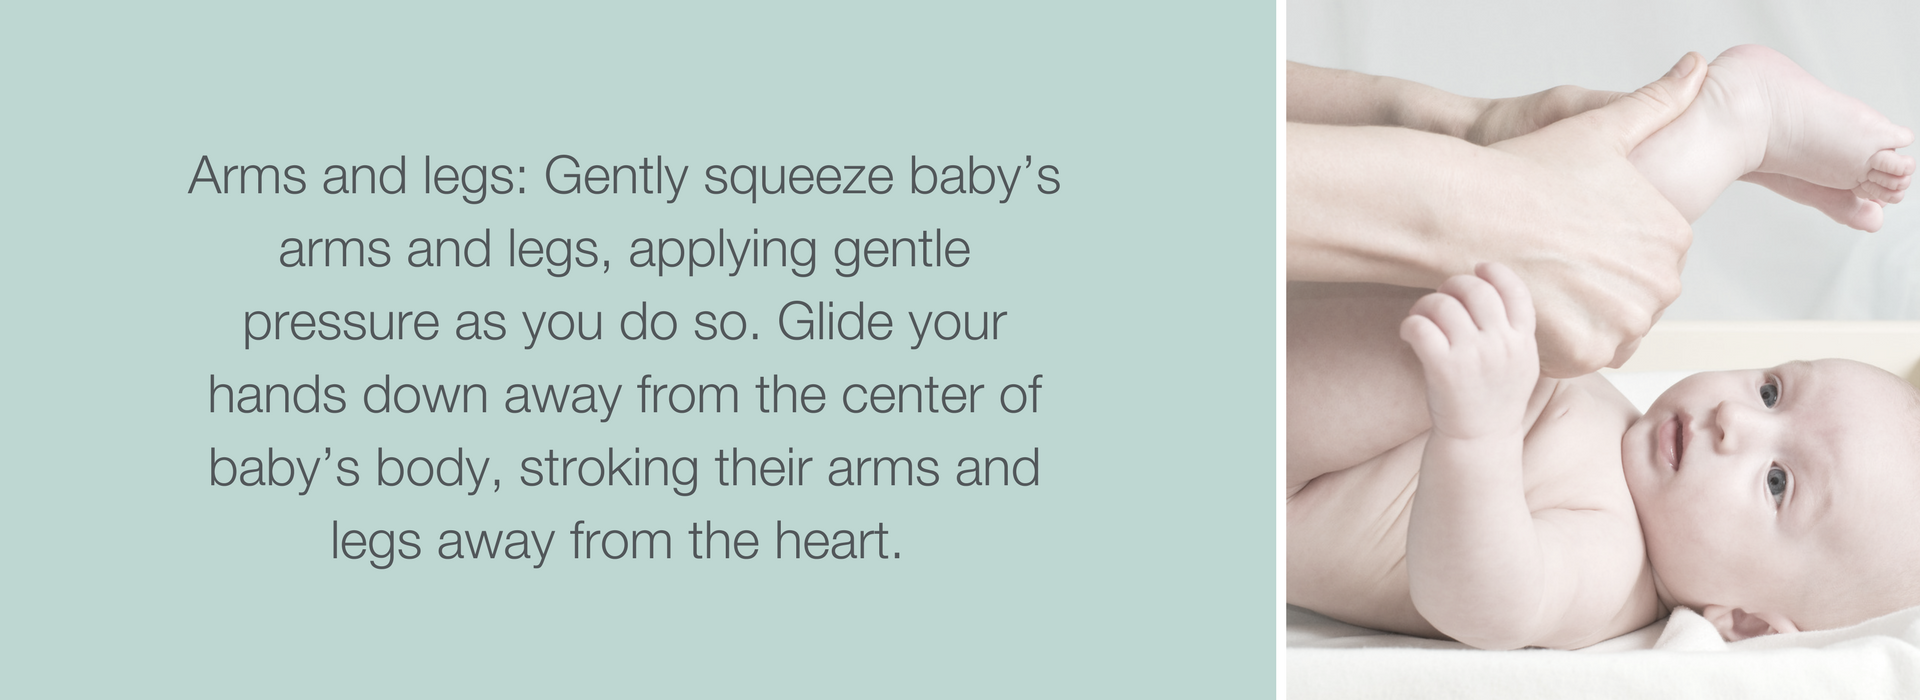 Infant massage is the perfect way to interact and bond with your baby. There are countless benefits of newborn baby massage from soothing a teething baby to easing symptoms of colic and gas. Click to discover the amazing benefits of baby massage and simple techniques to get you started. | The Top 6 Benefits of #BabyMassage for Infants from #BubziCo blog. #BabyHealth Care #BabyTips #NewbornCare #NewMomAdvice #NewMommy #NewMomAdvice #NewMommyTips #Newborn